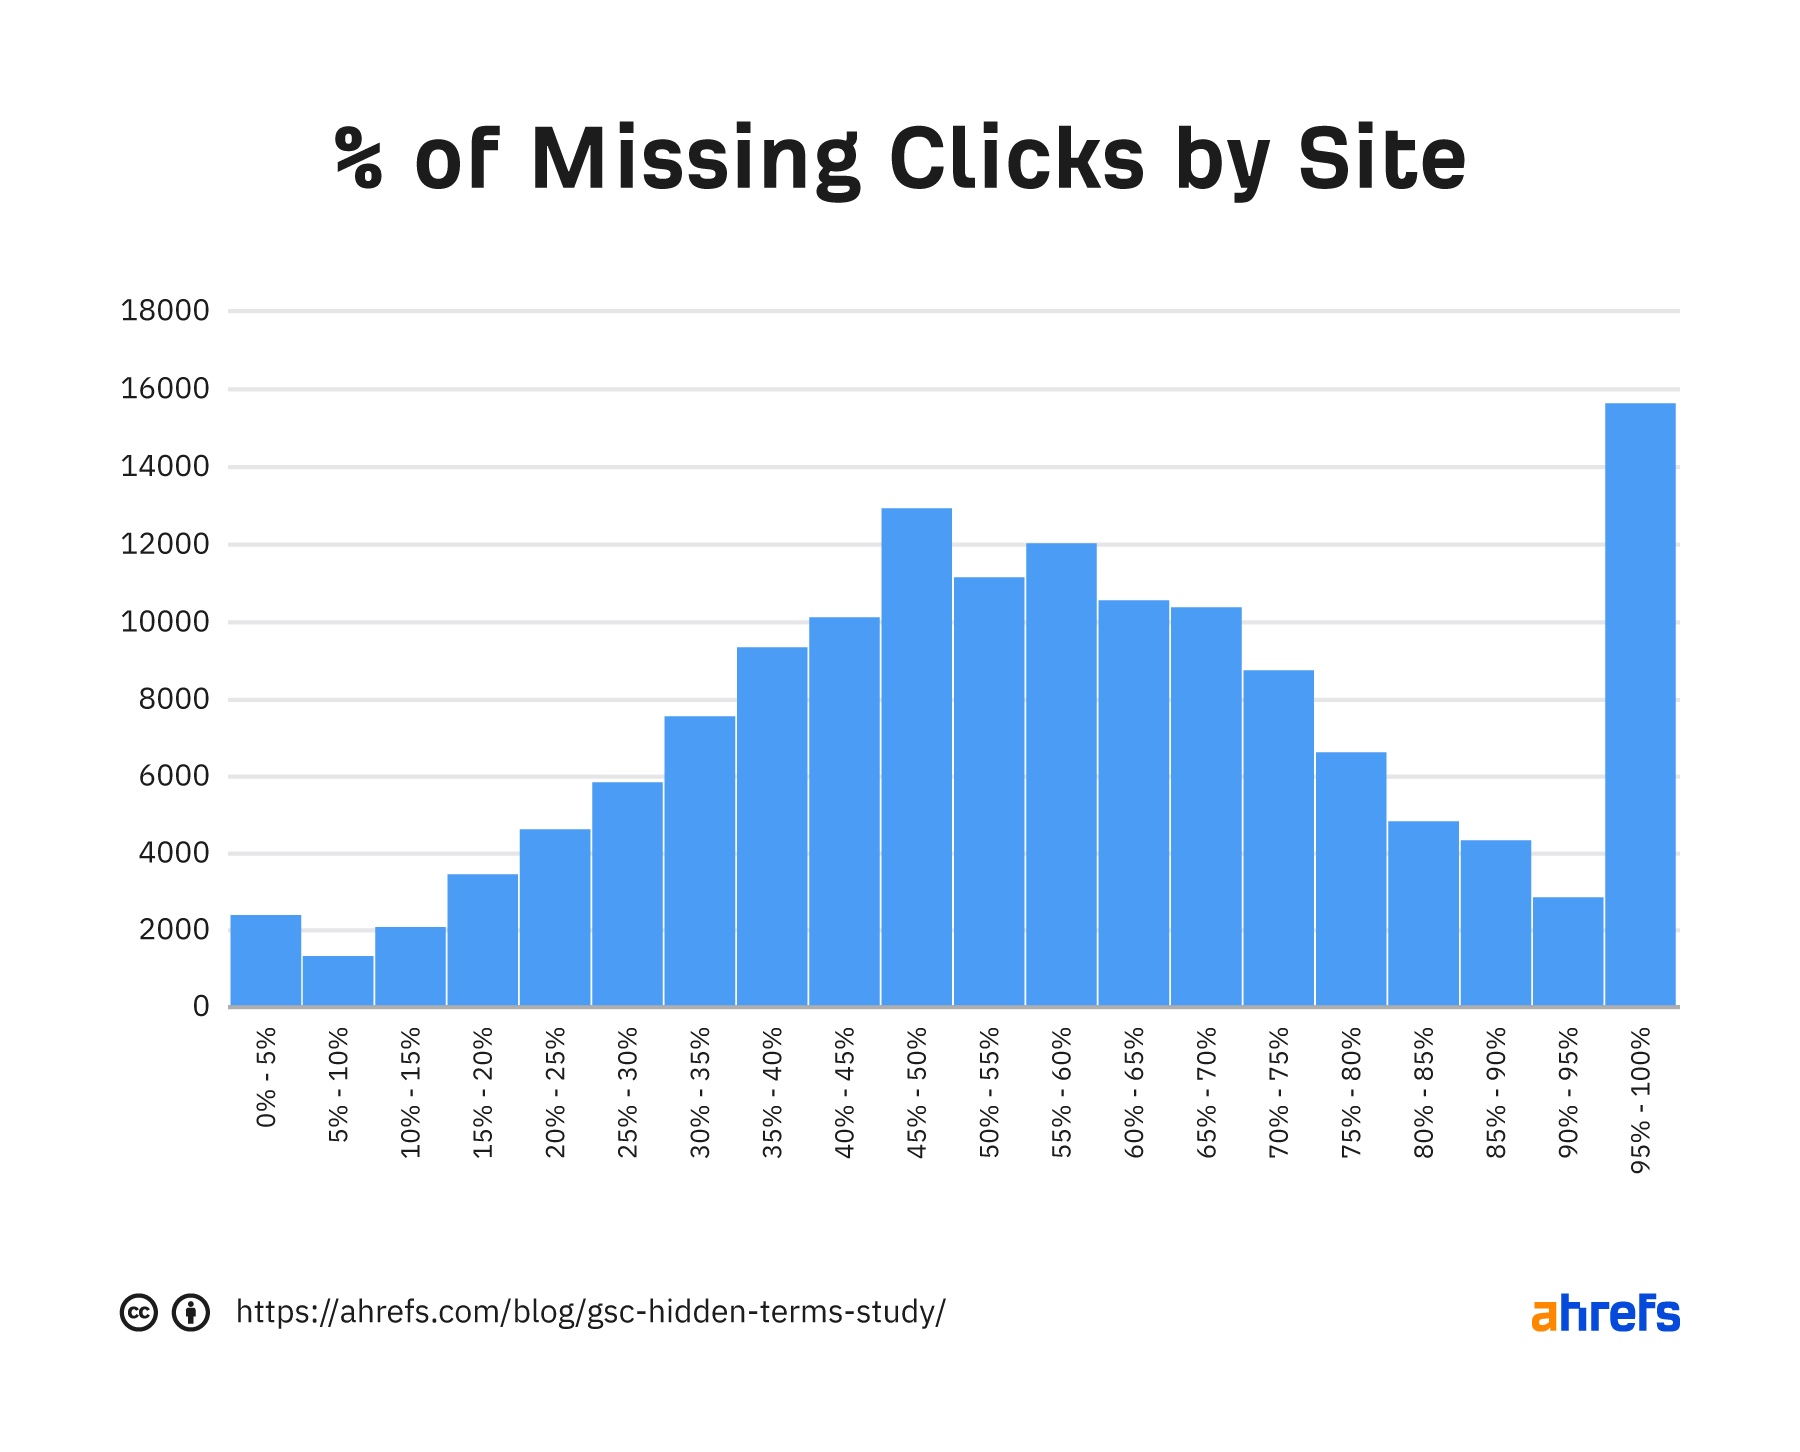 Percentage of missing clicks by site in GSC